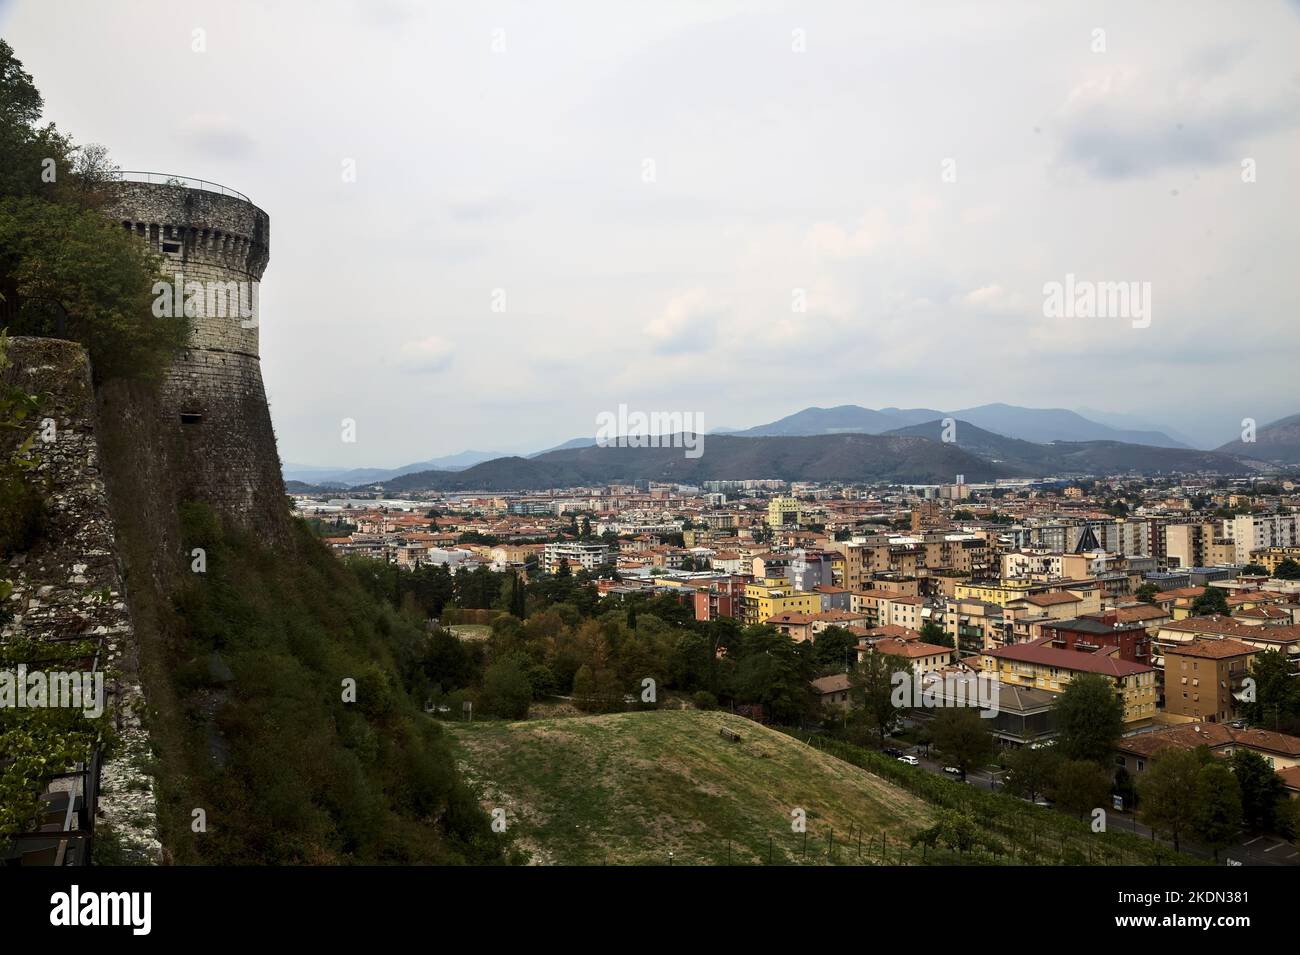 City seen from above framed by a castle built on a cliff on a cloudy day Stock Photo